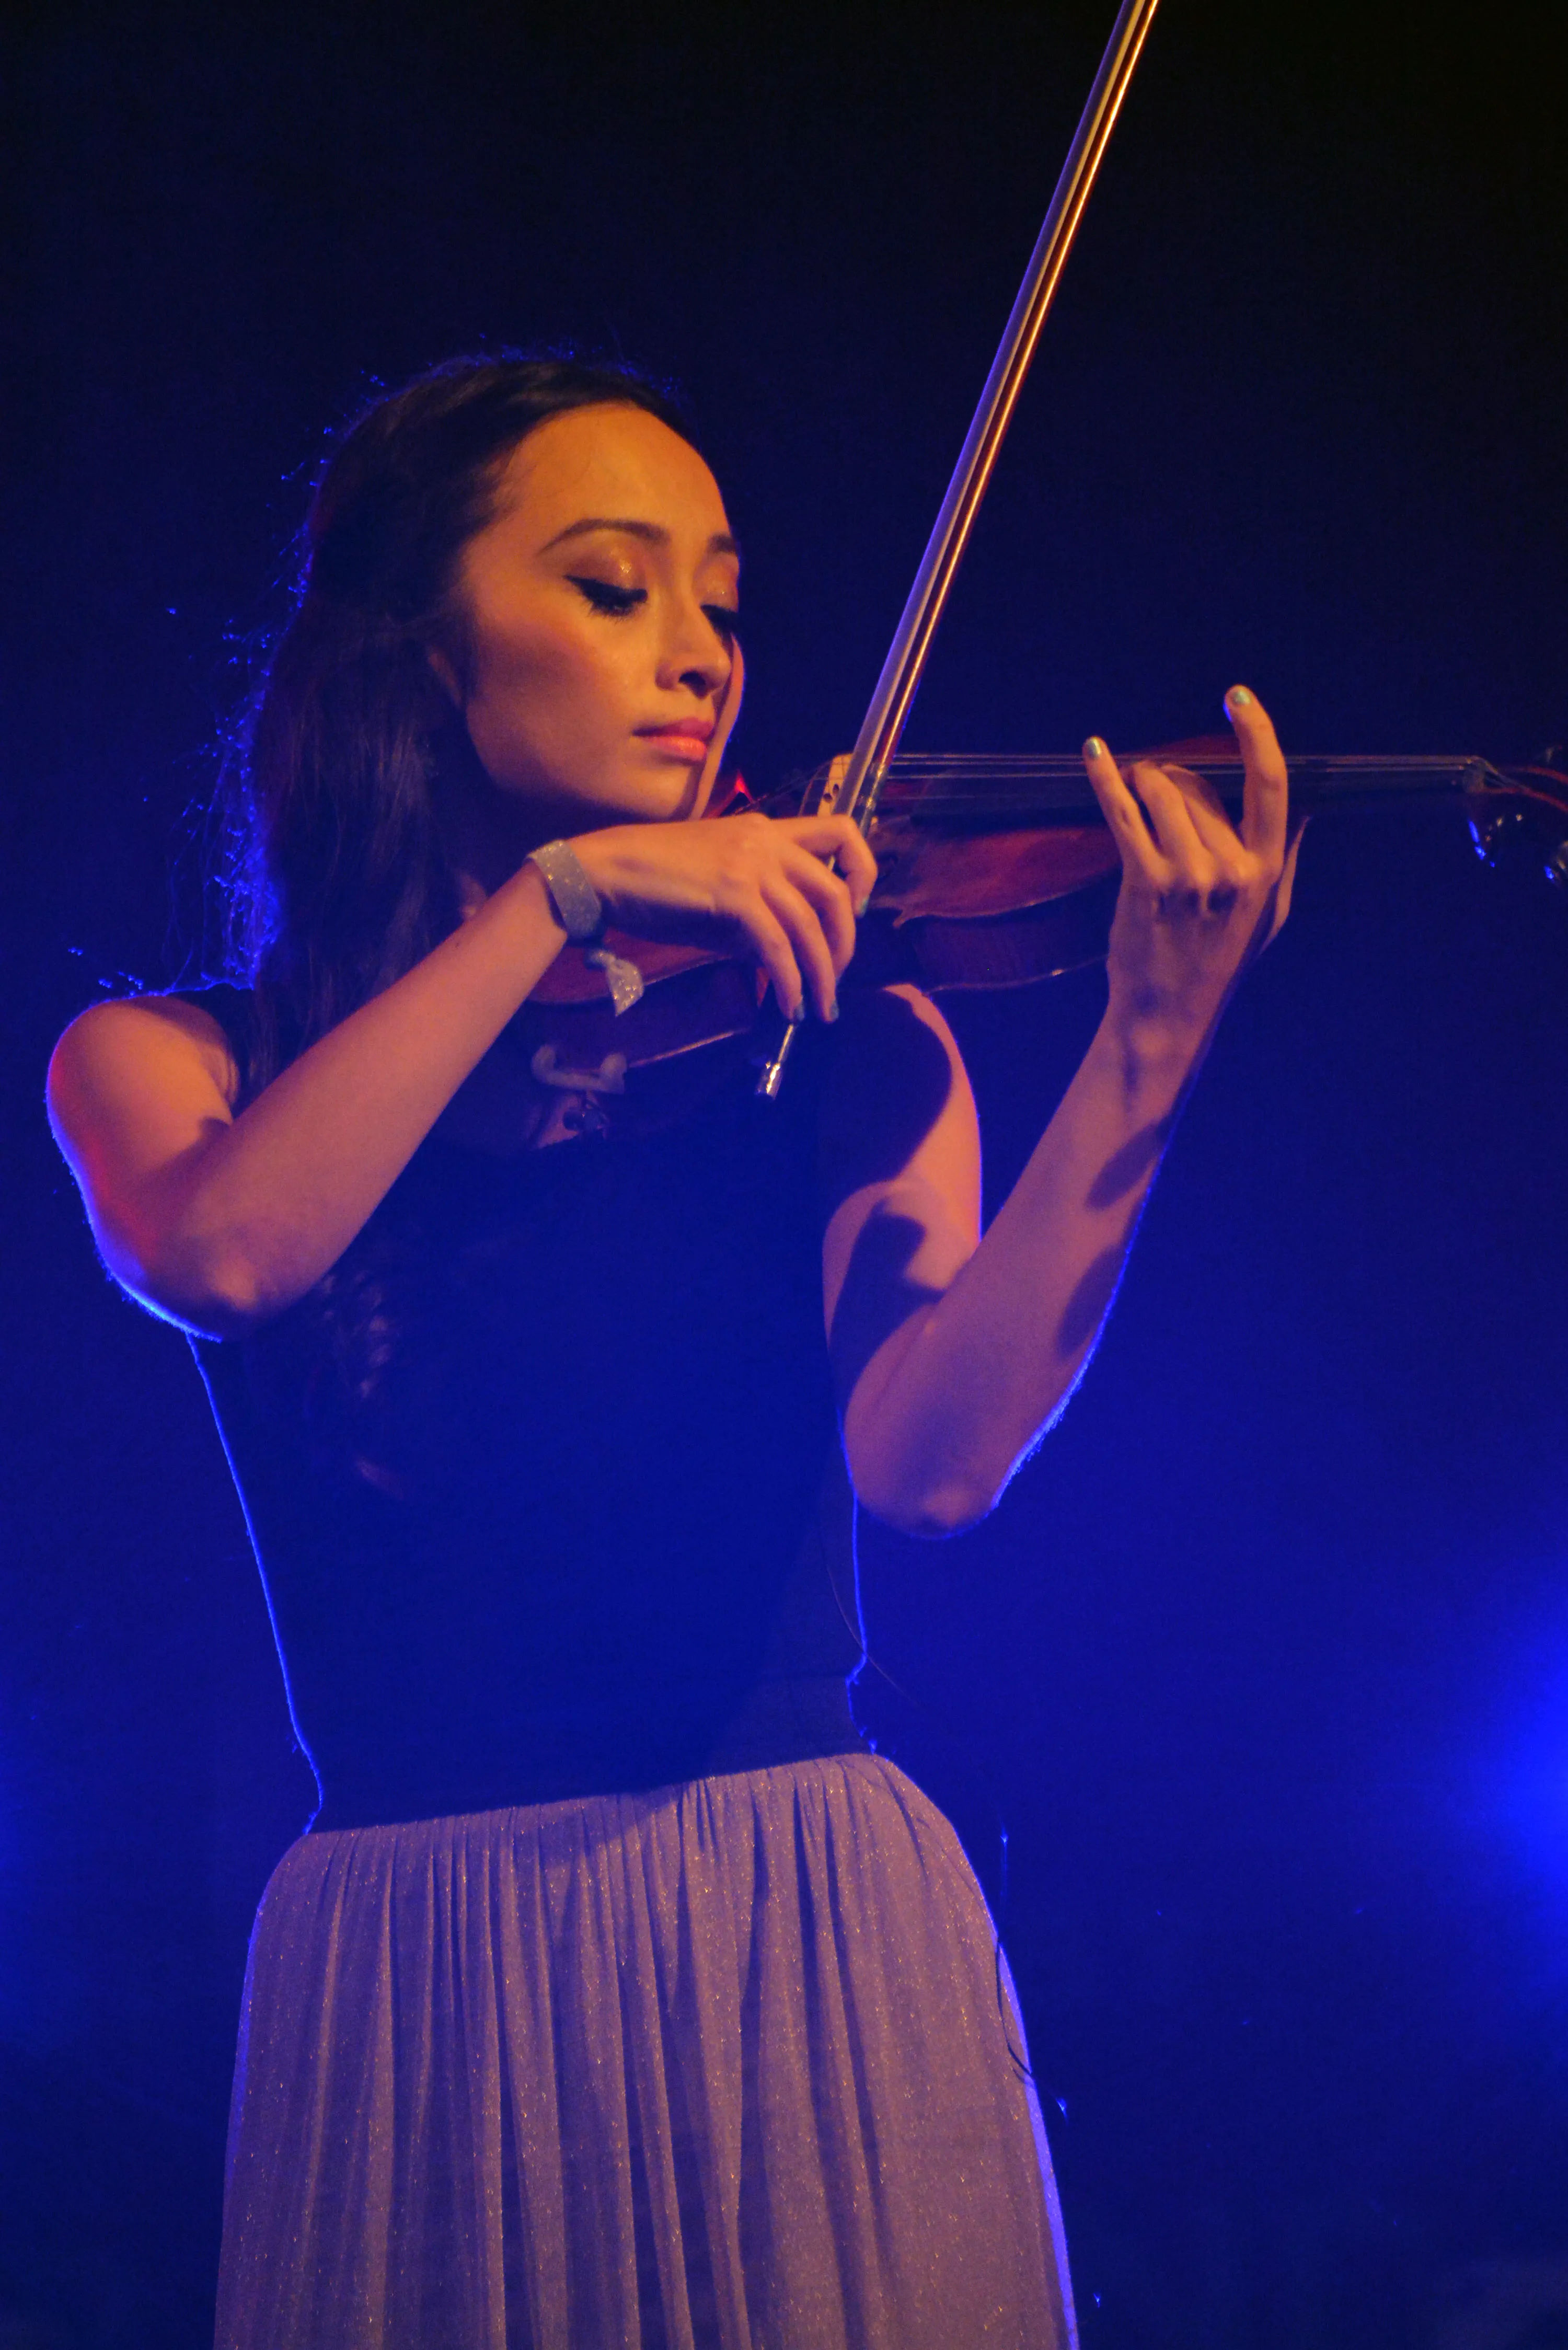 A young woman playing the violin on stage